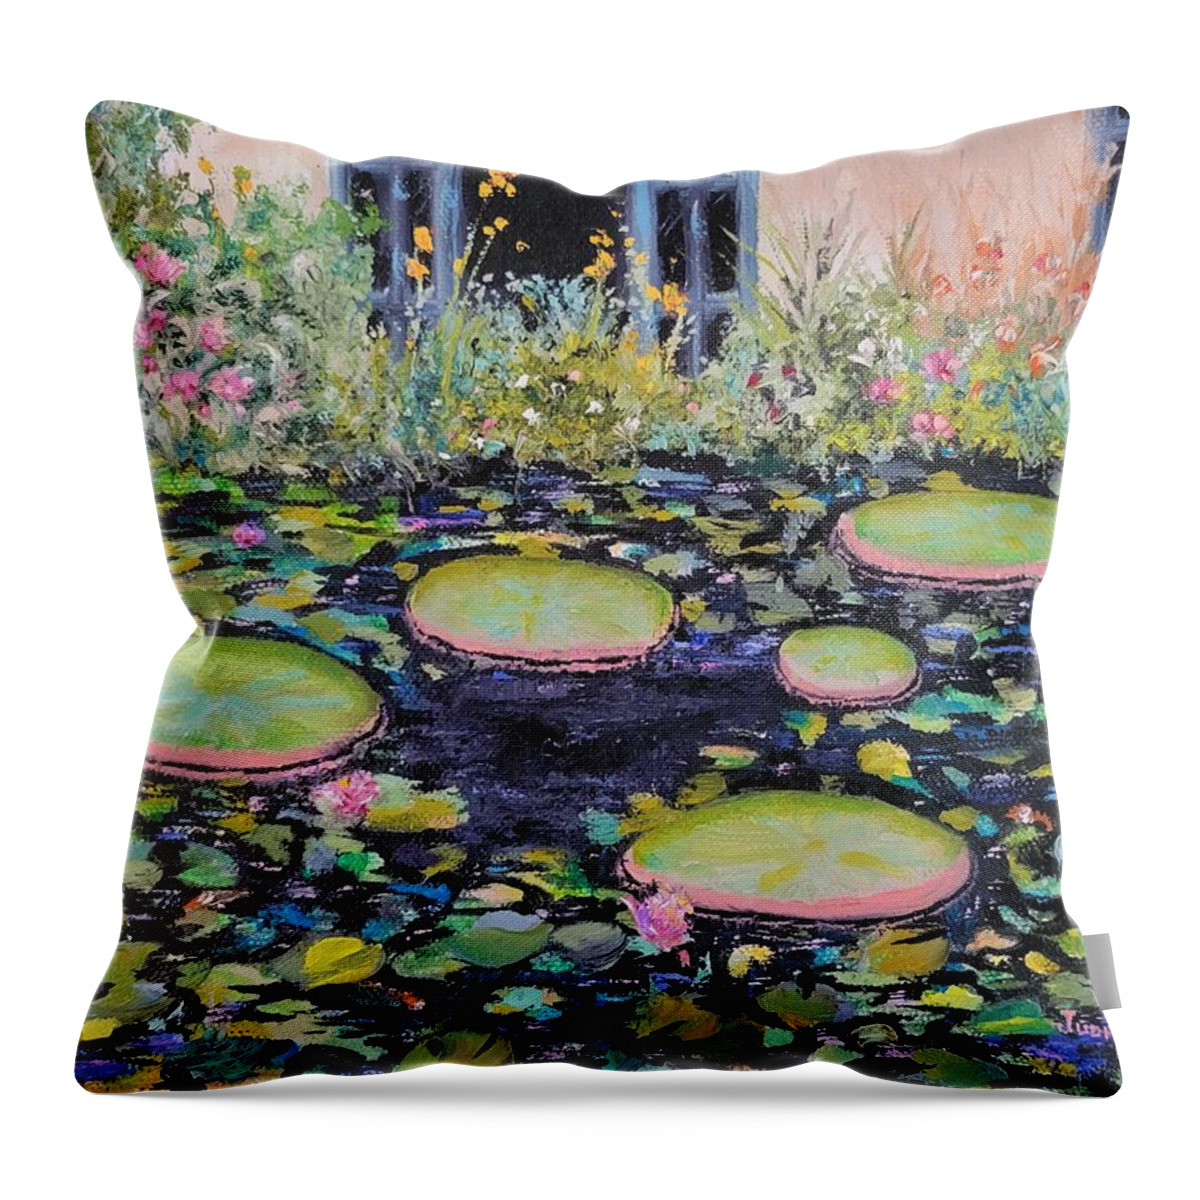 Lily Pads Throw Pillow featuring the painting Lily Pads by Judith Rhue